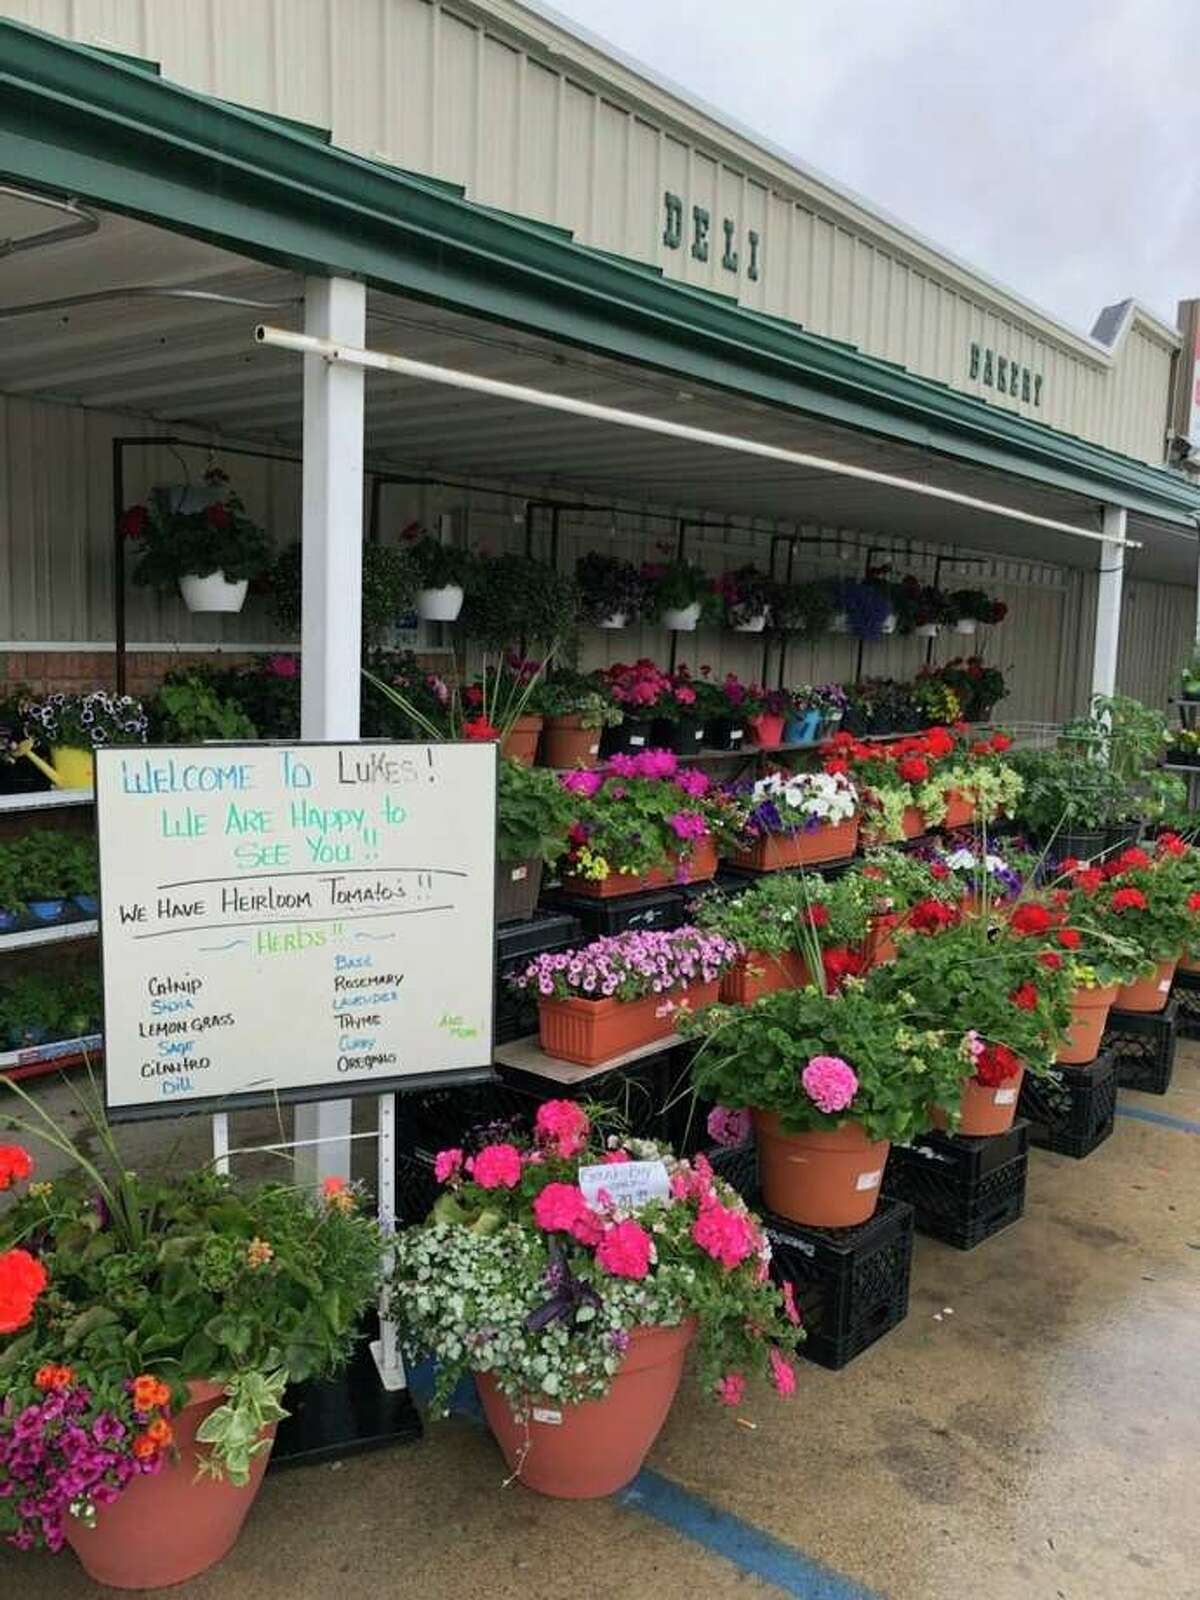 Part of the success of Luke’s Market is adapting to meeting customers’ needs with quality meat, products, and seasonal specials. In the spring and summer, a gardening center is added to the store’s offerings.